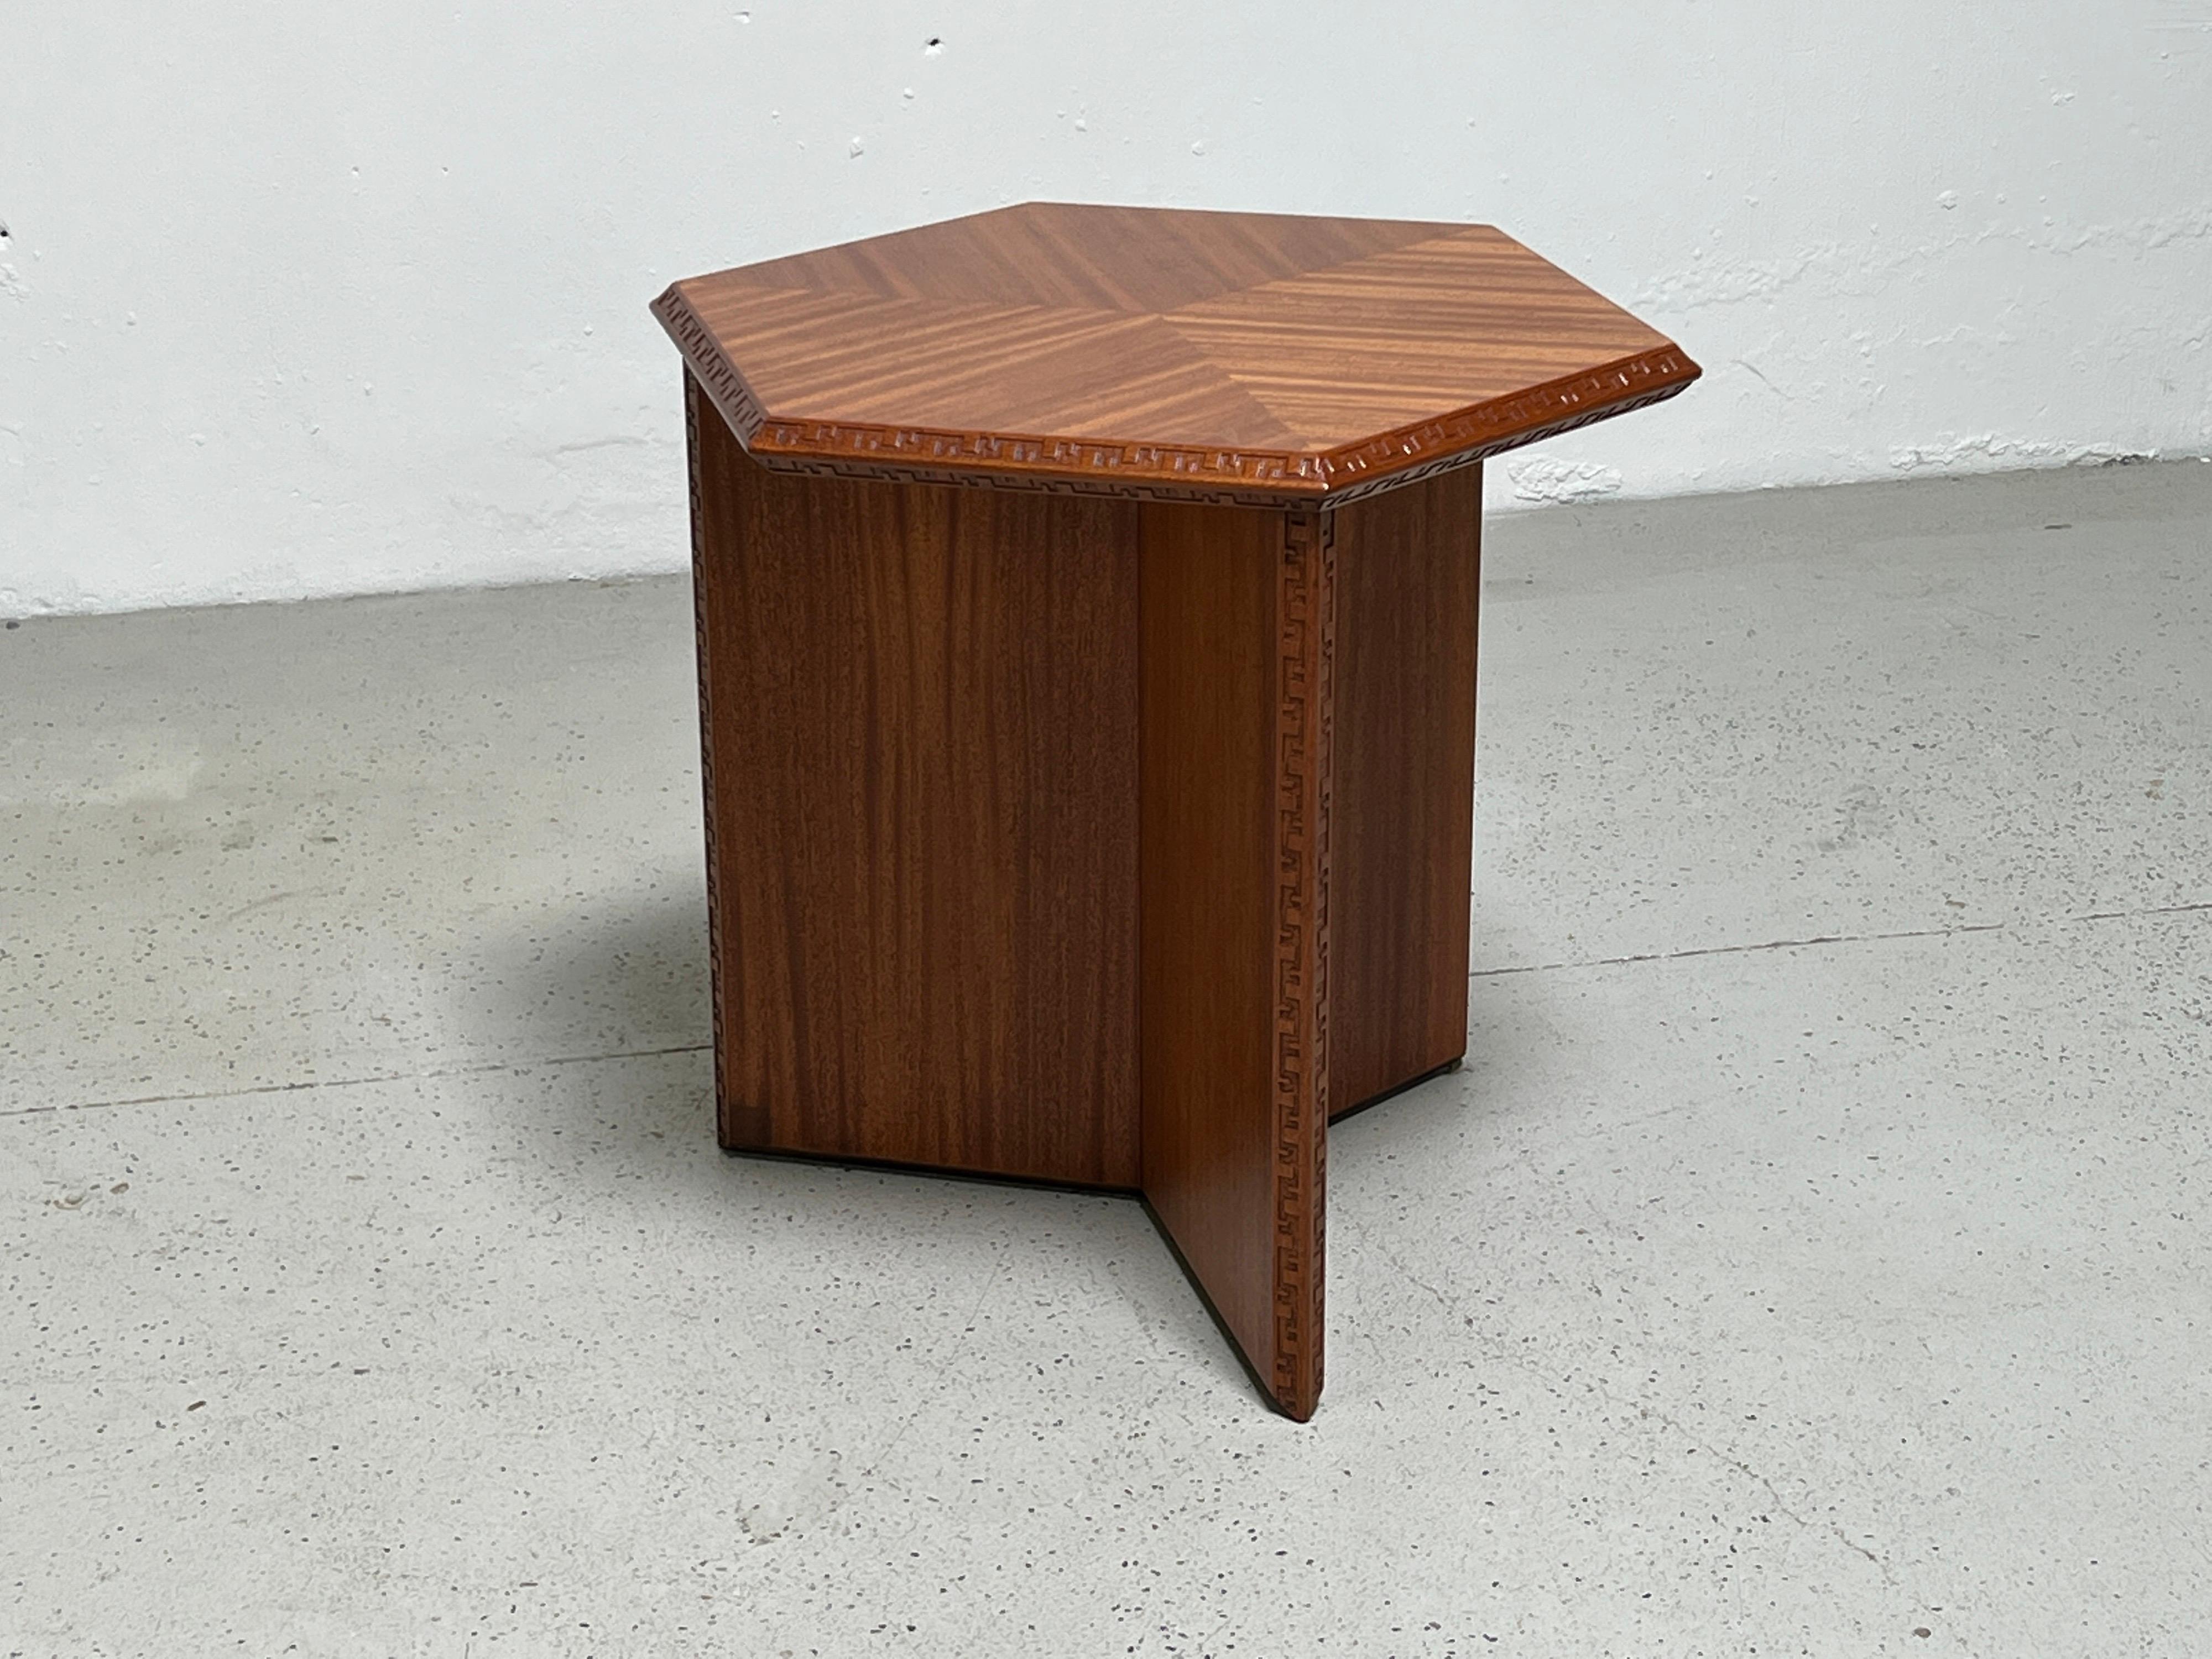 A mahogany hexagonal lamp table designed by Frank Lloyd Wright for Henredon. Smaller version available separately.